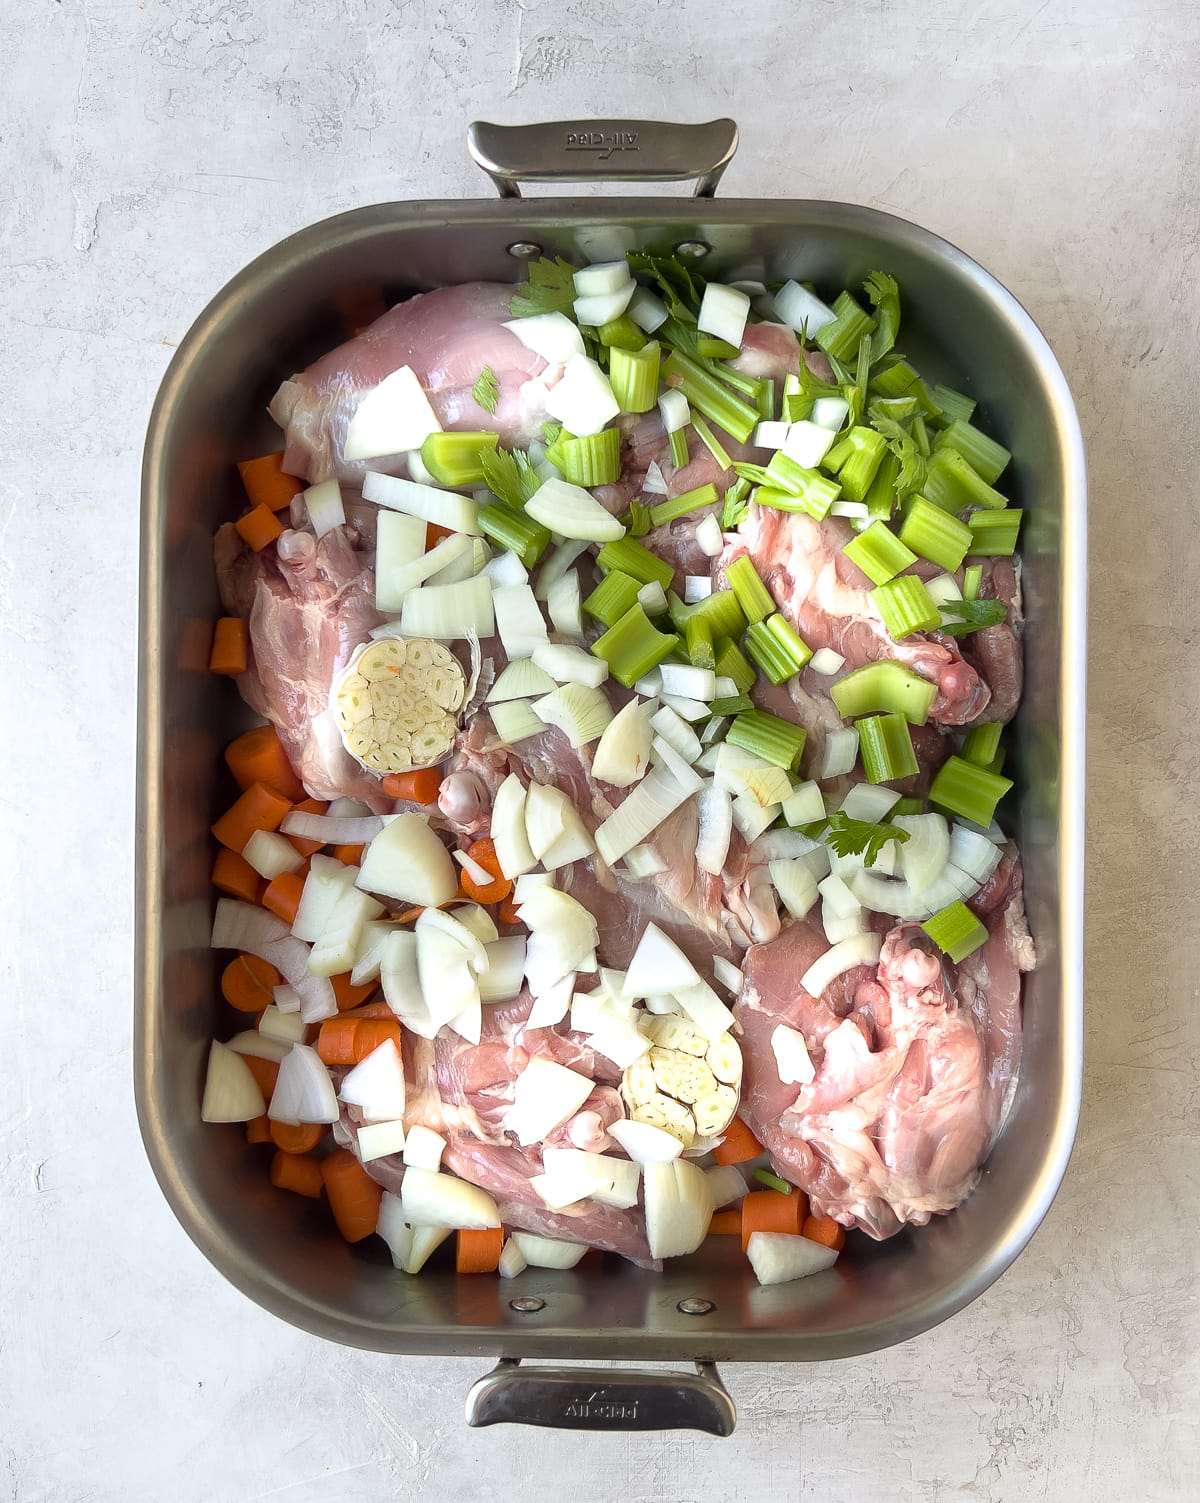 Raw turkey pieces and vegetables in pan.